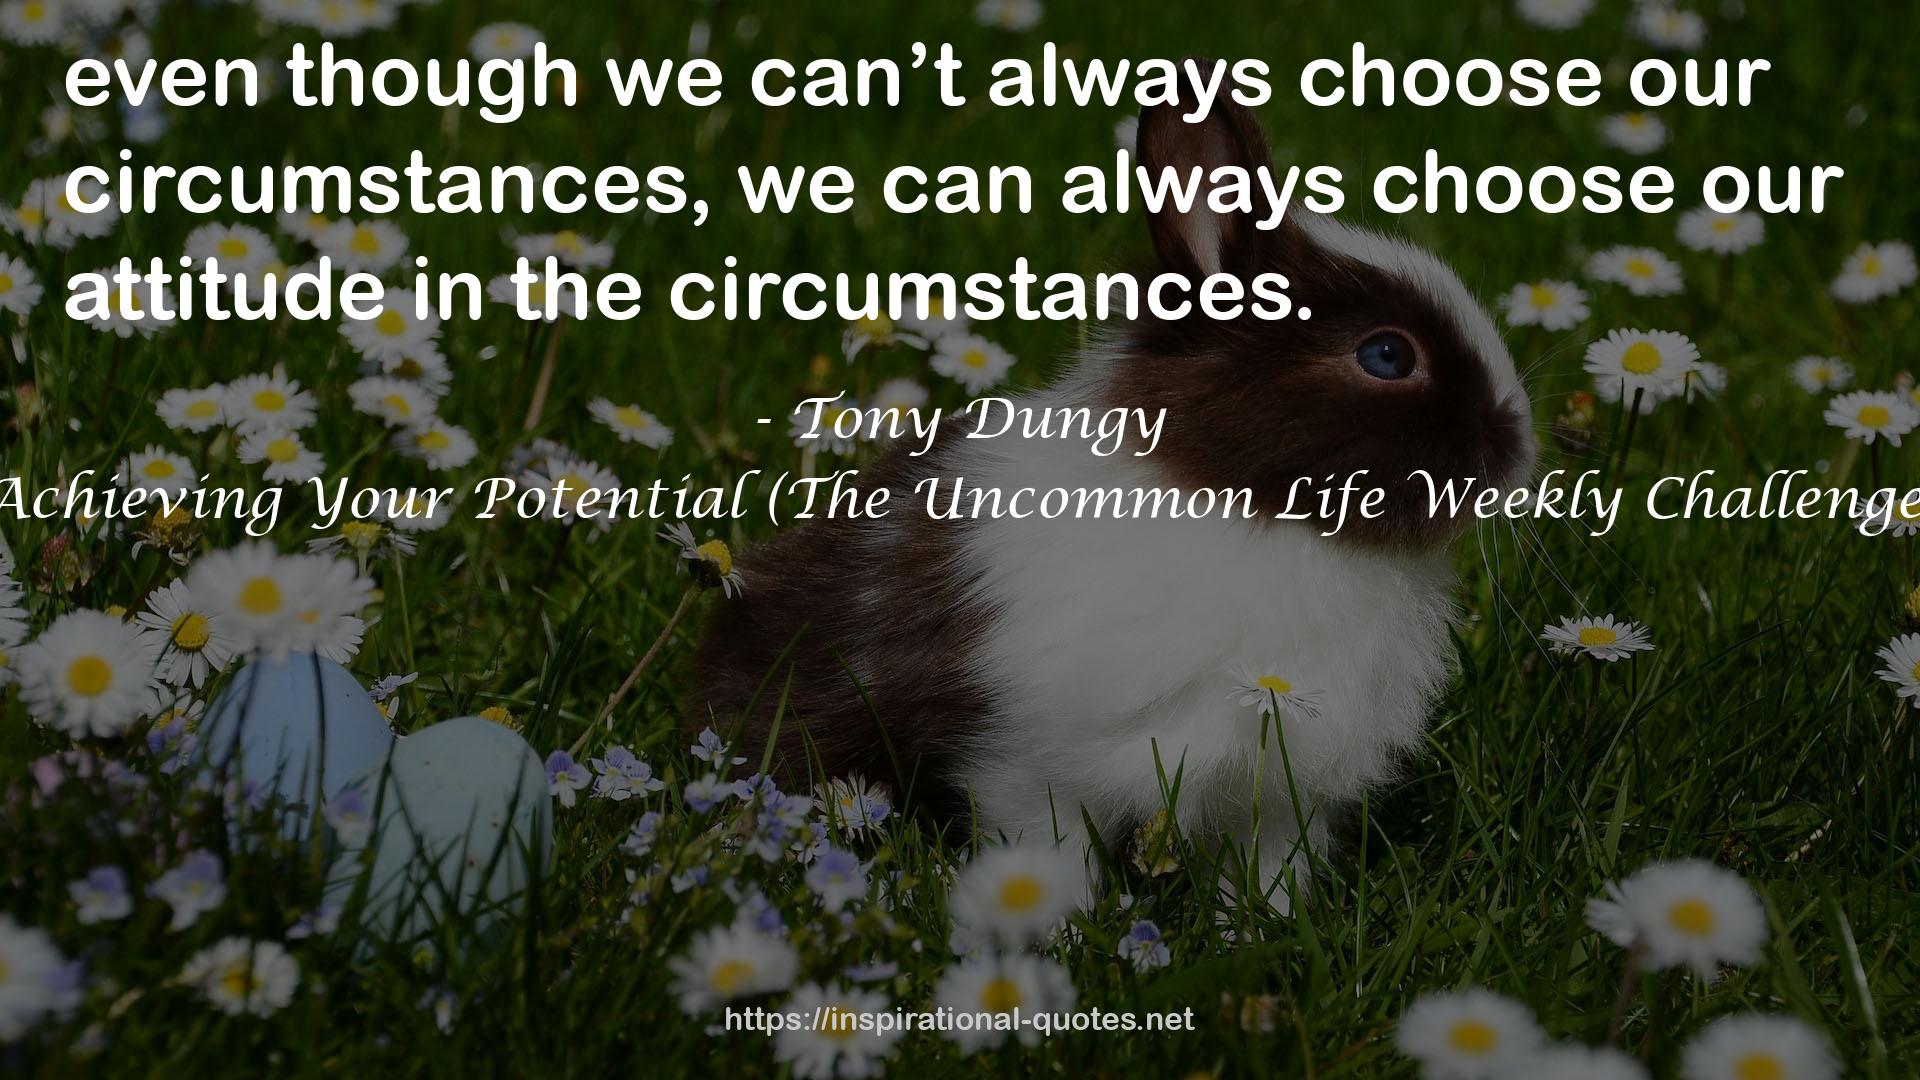 Achieving Your Potential (The Uncommon Life Weekly Challenge) QUOTES